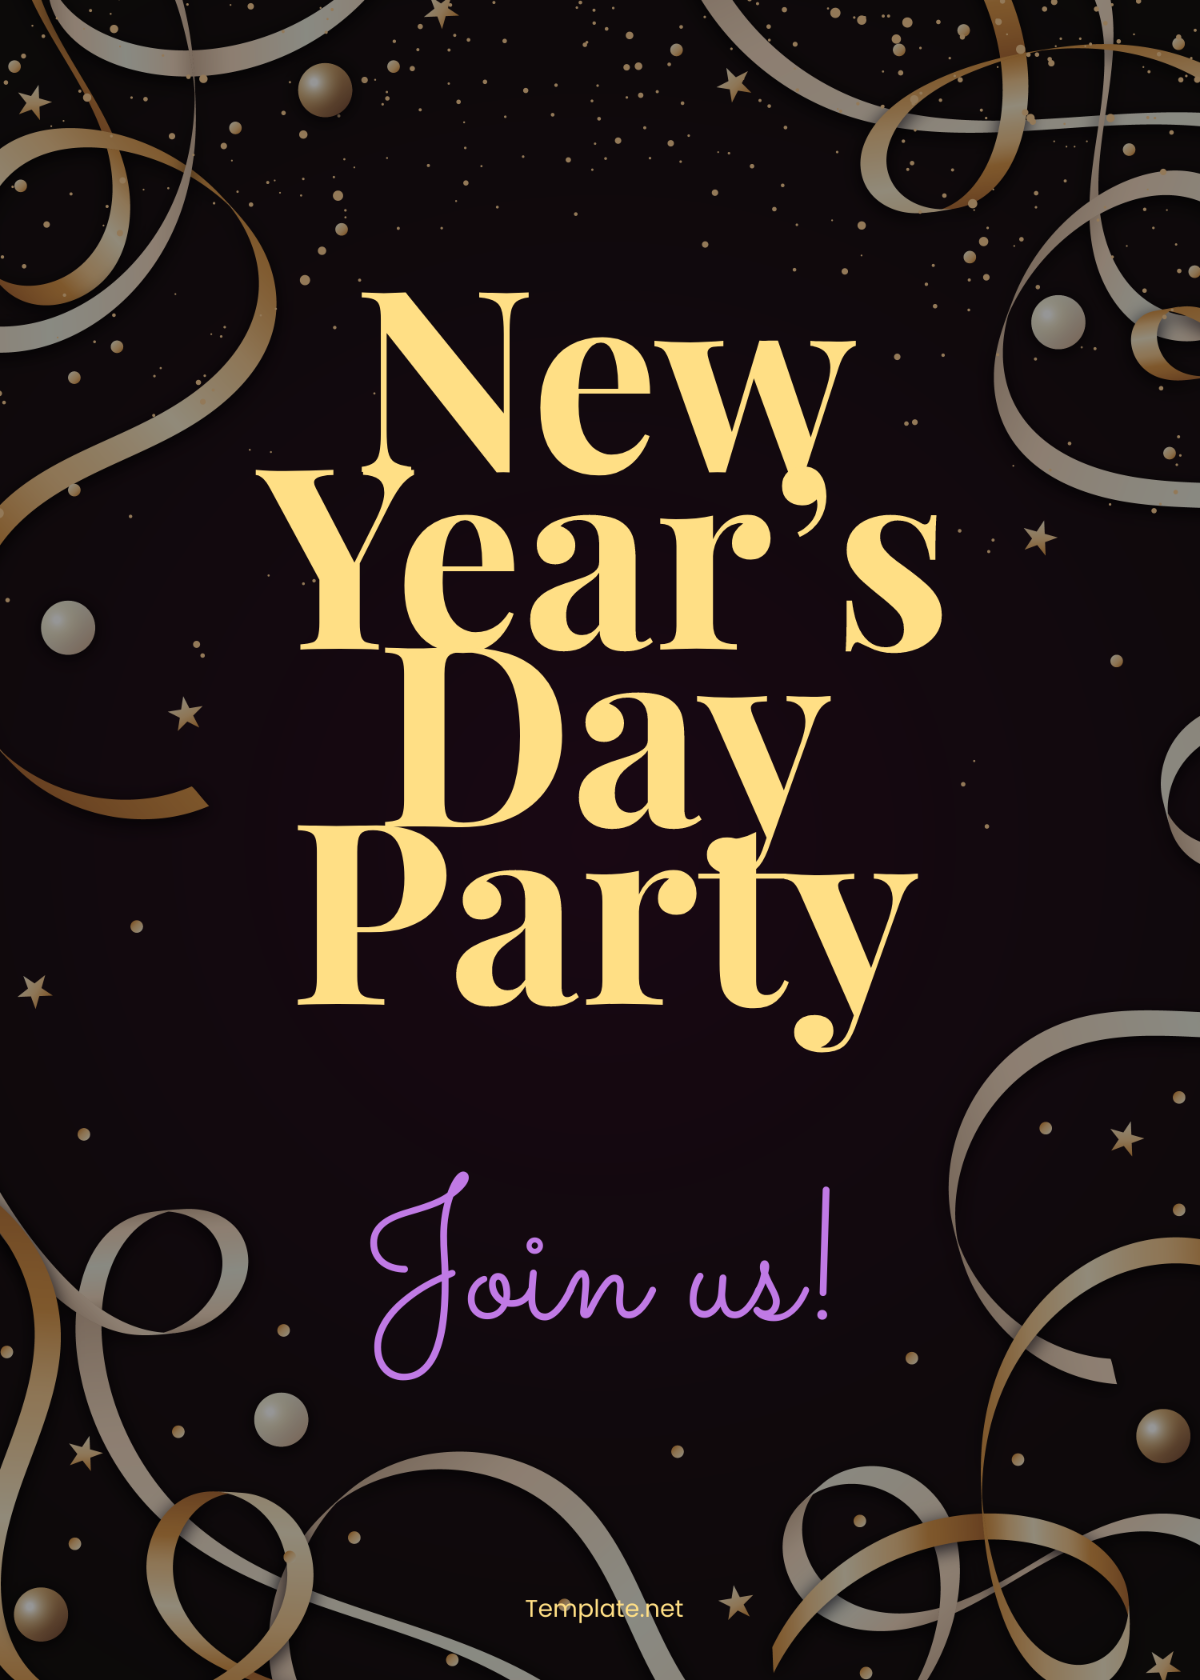 Free New Year's Day Party Invitation Template